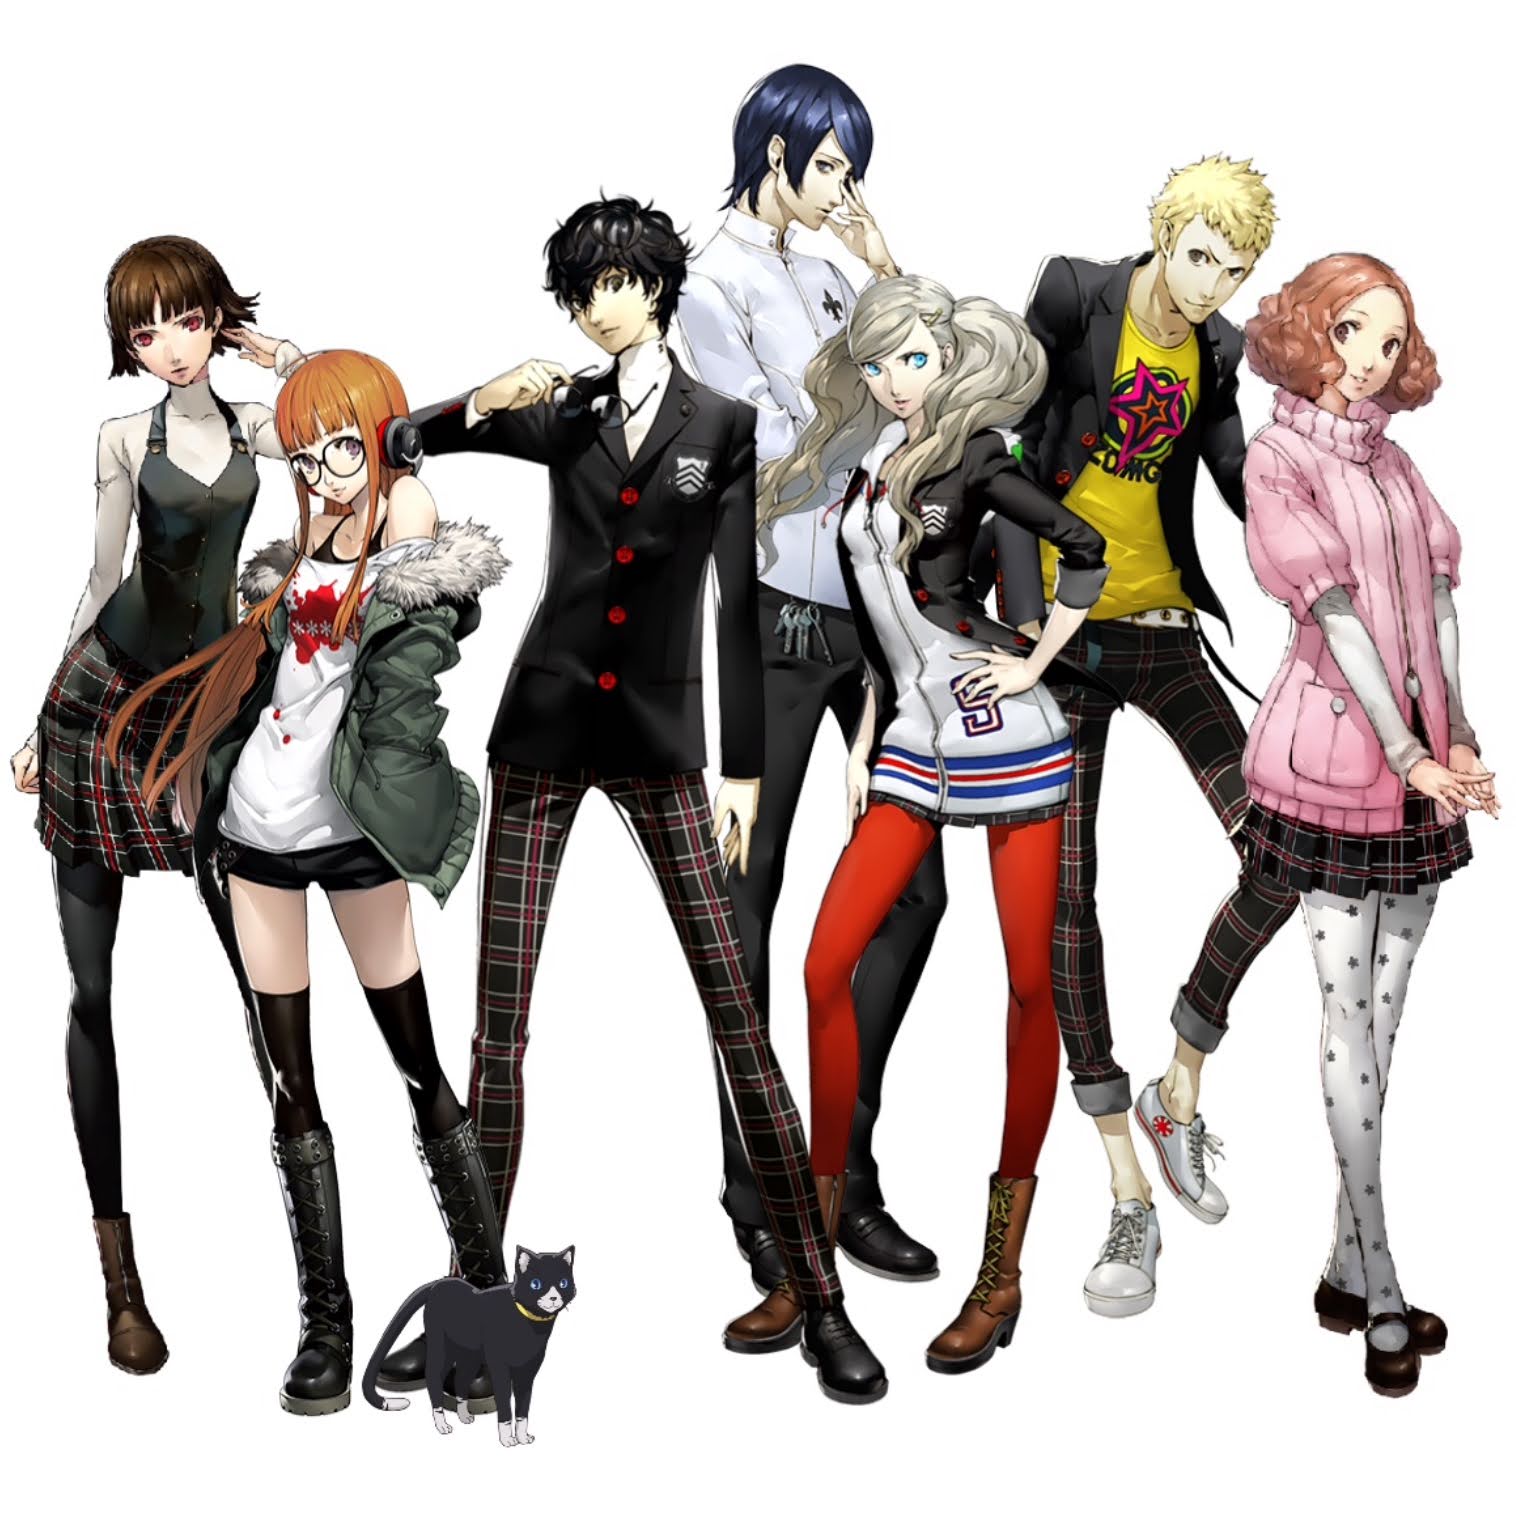 Persona 5 Characters - Who Are They?